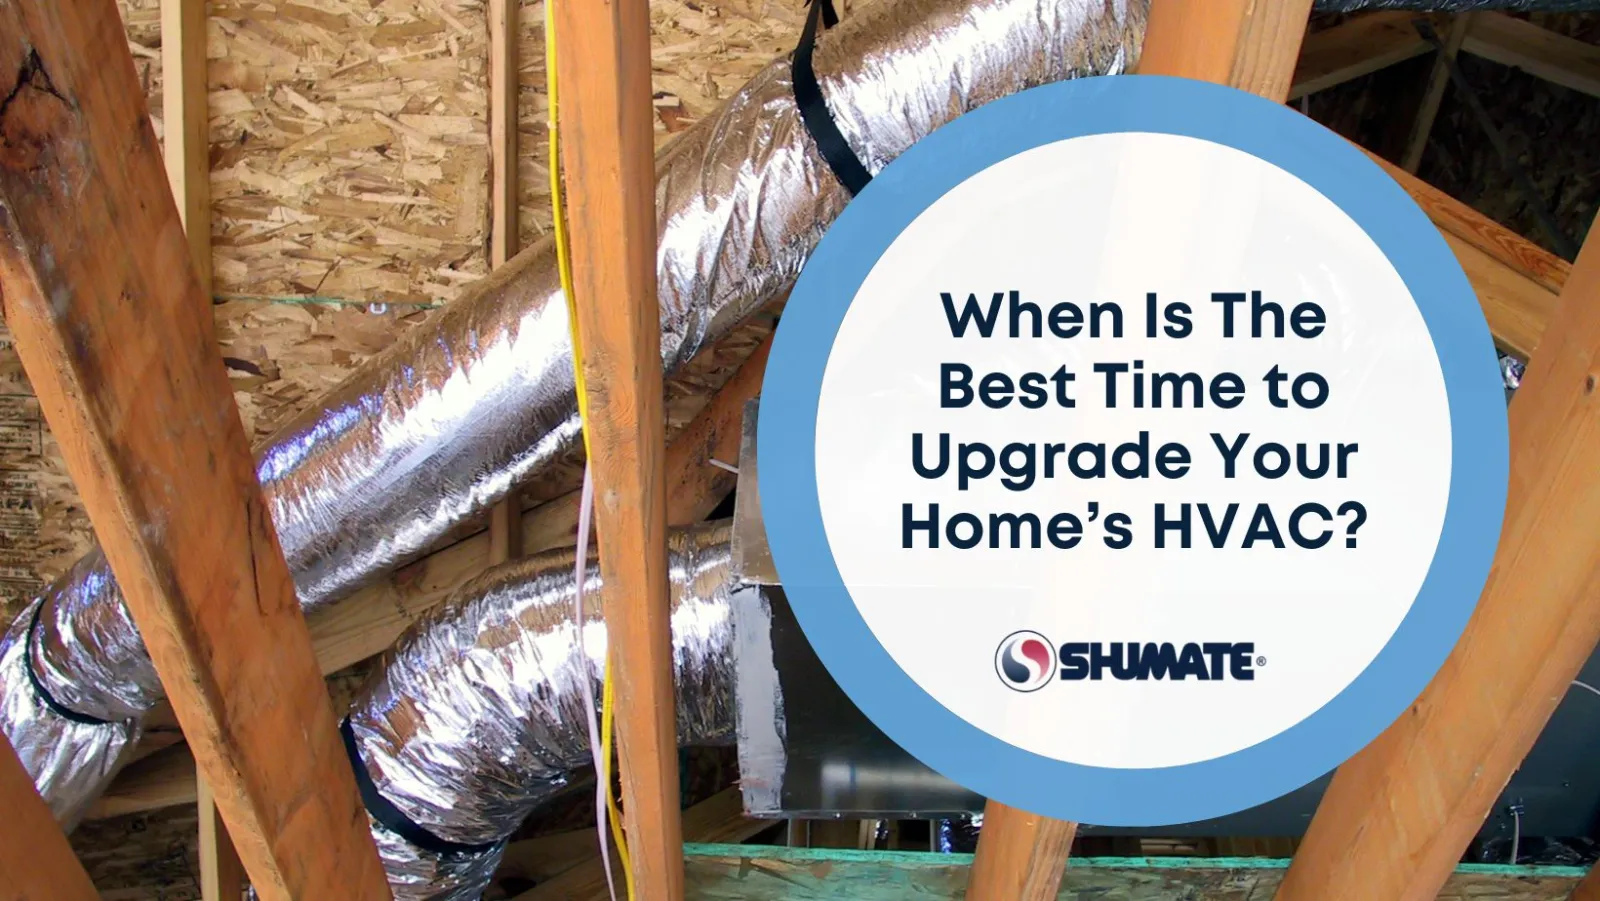 When Is The Best Time to Upgrade Your Home's HVAC? 